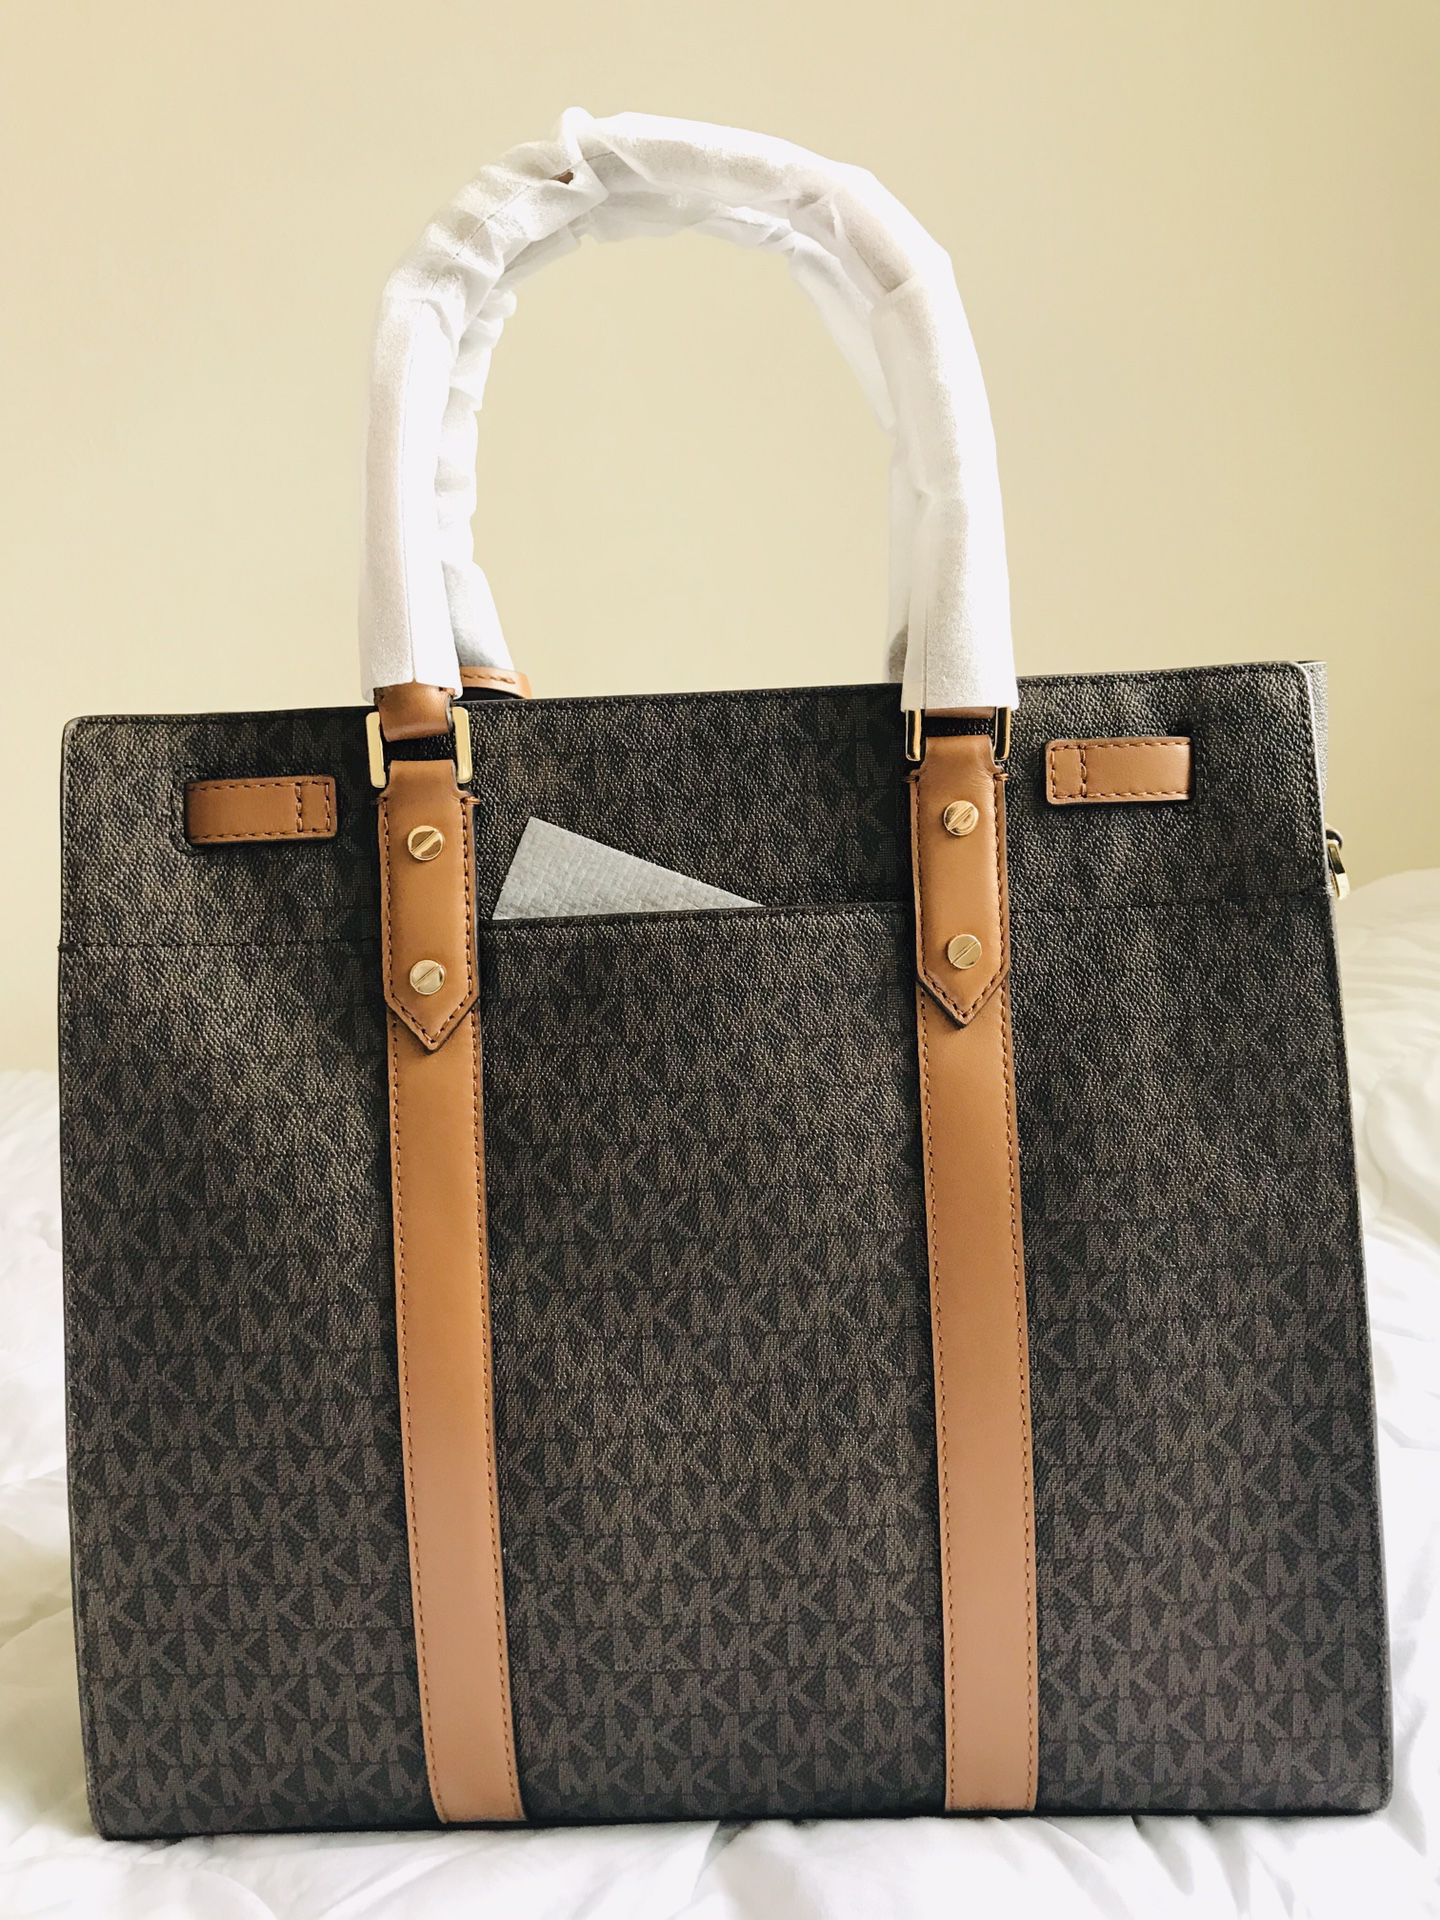 MICHAEL KORS LARGE LEATHER TOTE